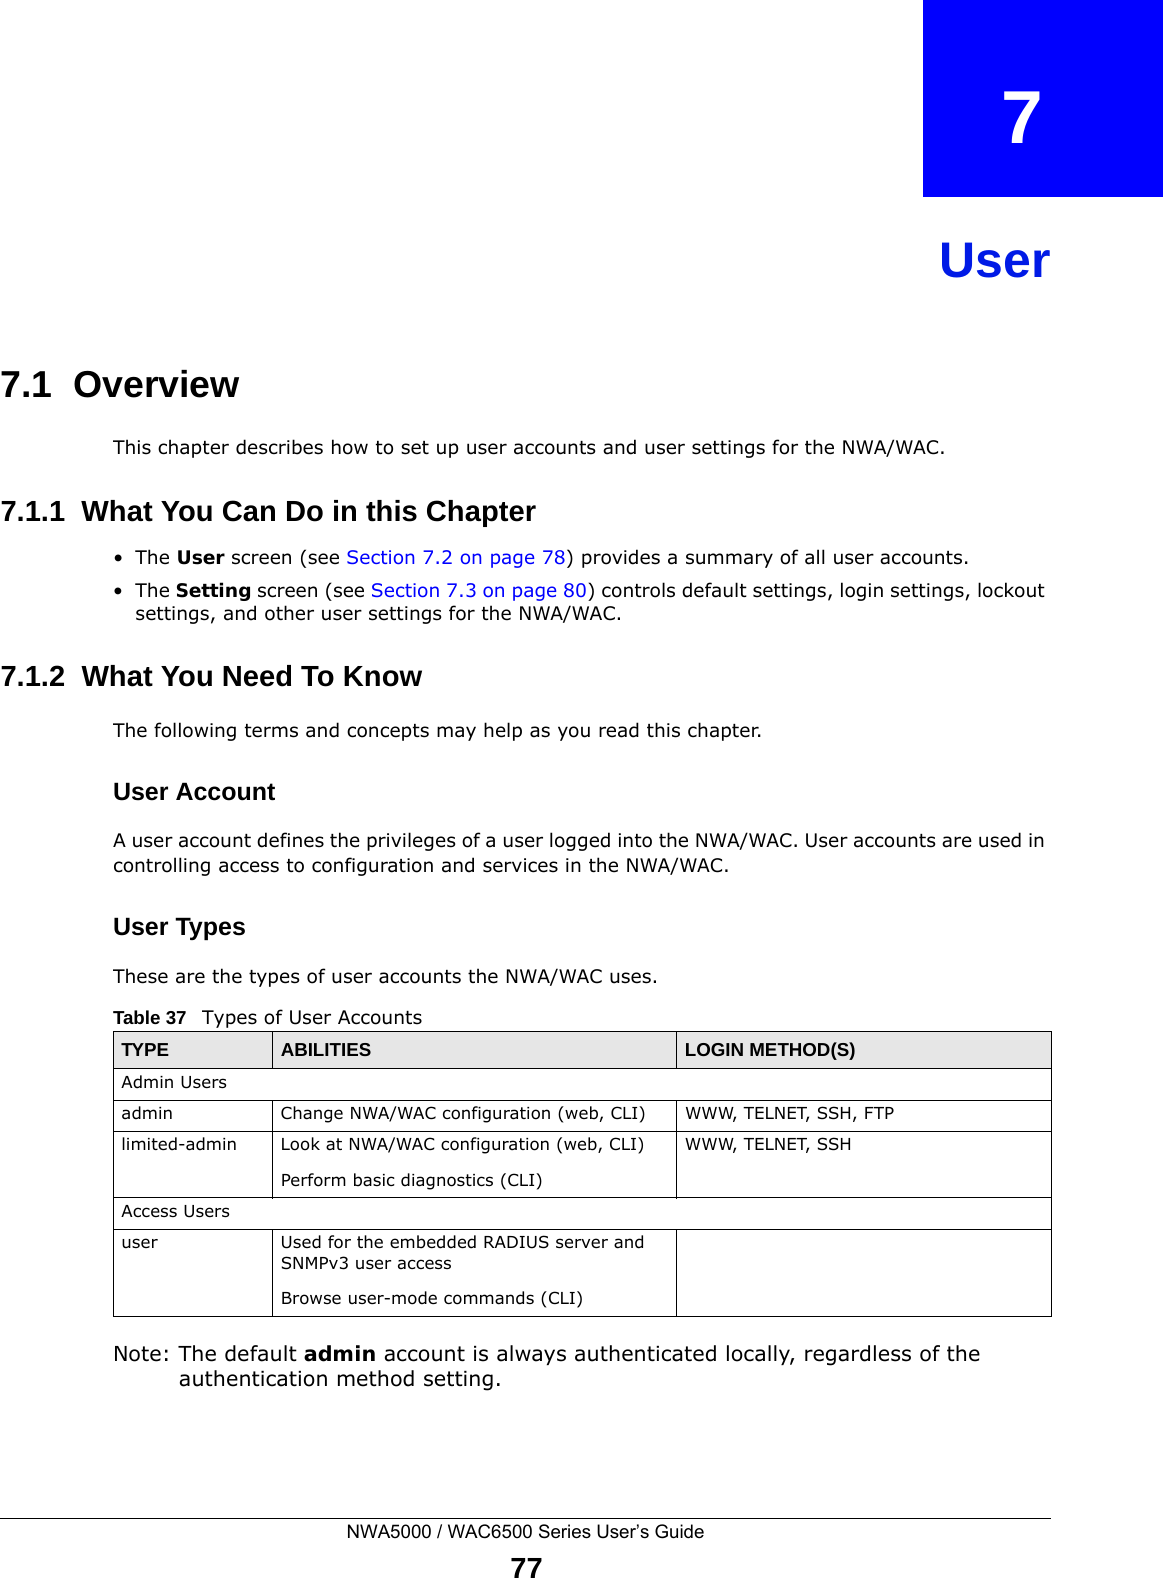 NWA5000 / WAC6500 Series User’s Guide77CHAPTER   7User7.1  OverviewThis chapter describes how to set up user accounts and user settings for the NWA/WAC. 7.1.1  What You Can Do in this Chapter•The User screen (see Section 7.2 on page 78) provides a summary of all user accounts.•The Setting screen (see Section 7.3 on page 80) controls default settings, login settings, lockout settings, and other user settings for the NWA/WAC. 7.1.2  What You Need To KnowThe following terms and concepts may help as you read this chapter.User AccountA user account defines the privileges of a user logged into the NWA/WAC. User accounts are used in controlling access to configuration and services in the NWA/WAC.User TypesThese are the types of user accounts the NWA/WAC uses.  Note: The default admin account is always authenticated locally, regardless of the authentication method setting.Table 37   Types of User AccountsTYPE ABILITIES LOGIN METHOD(S)Admin Usersadmin Change NWA/WAC configuration (web, CLI) WWW, TELNET, SSH, FTPlimited-admin Look at NWA/WAC configuration (web, CLI)Perform basic diagnostics (CLI)WWW, TELNET, SSHAccess Usersuser Used for the embedded RADIUS server and SNMPv3 user accessBrowse user-mode commands (CLI)